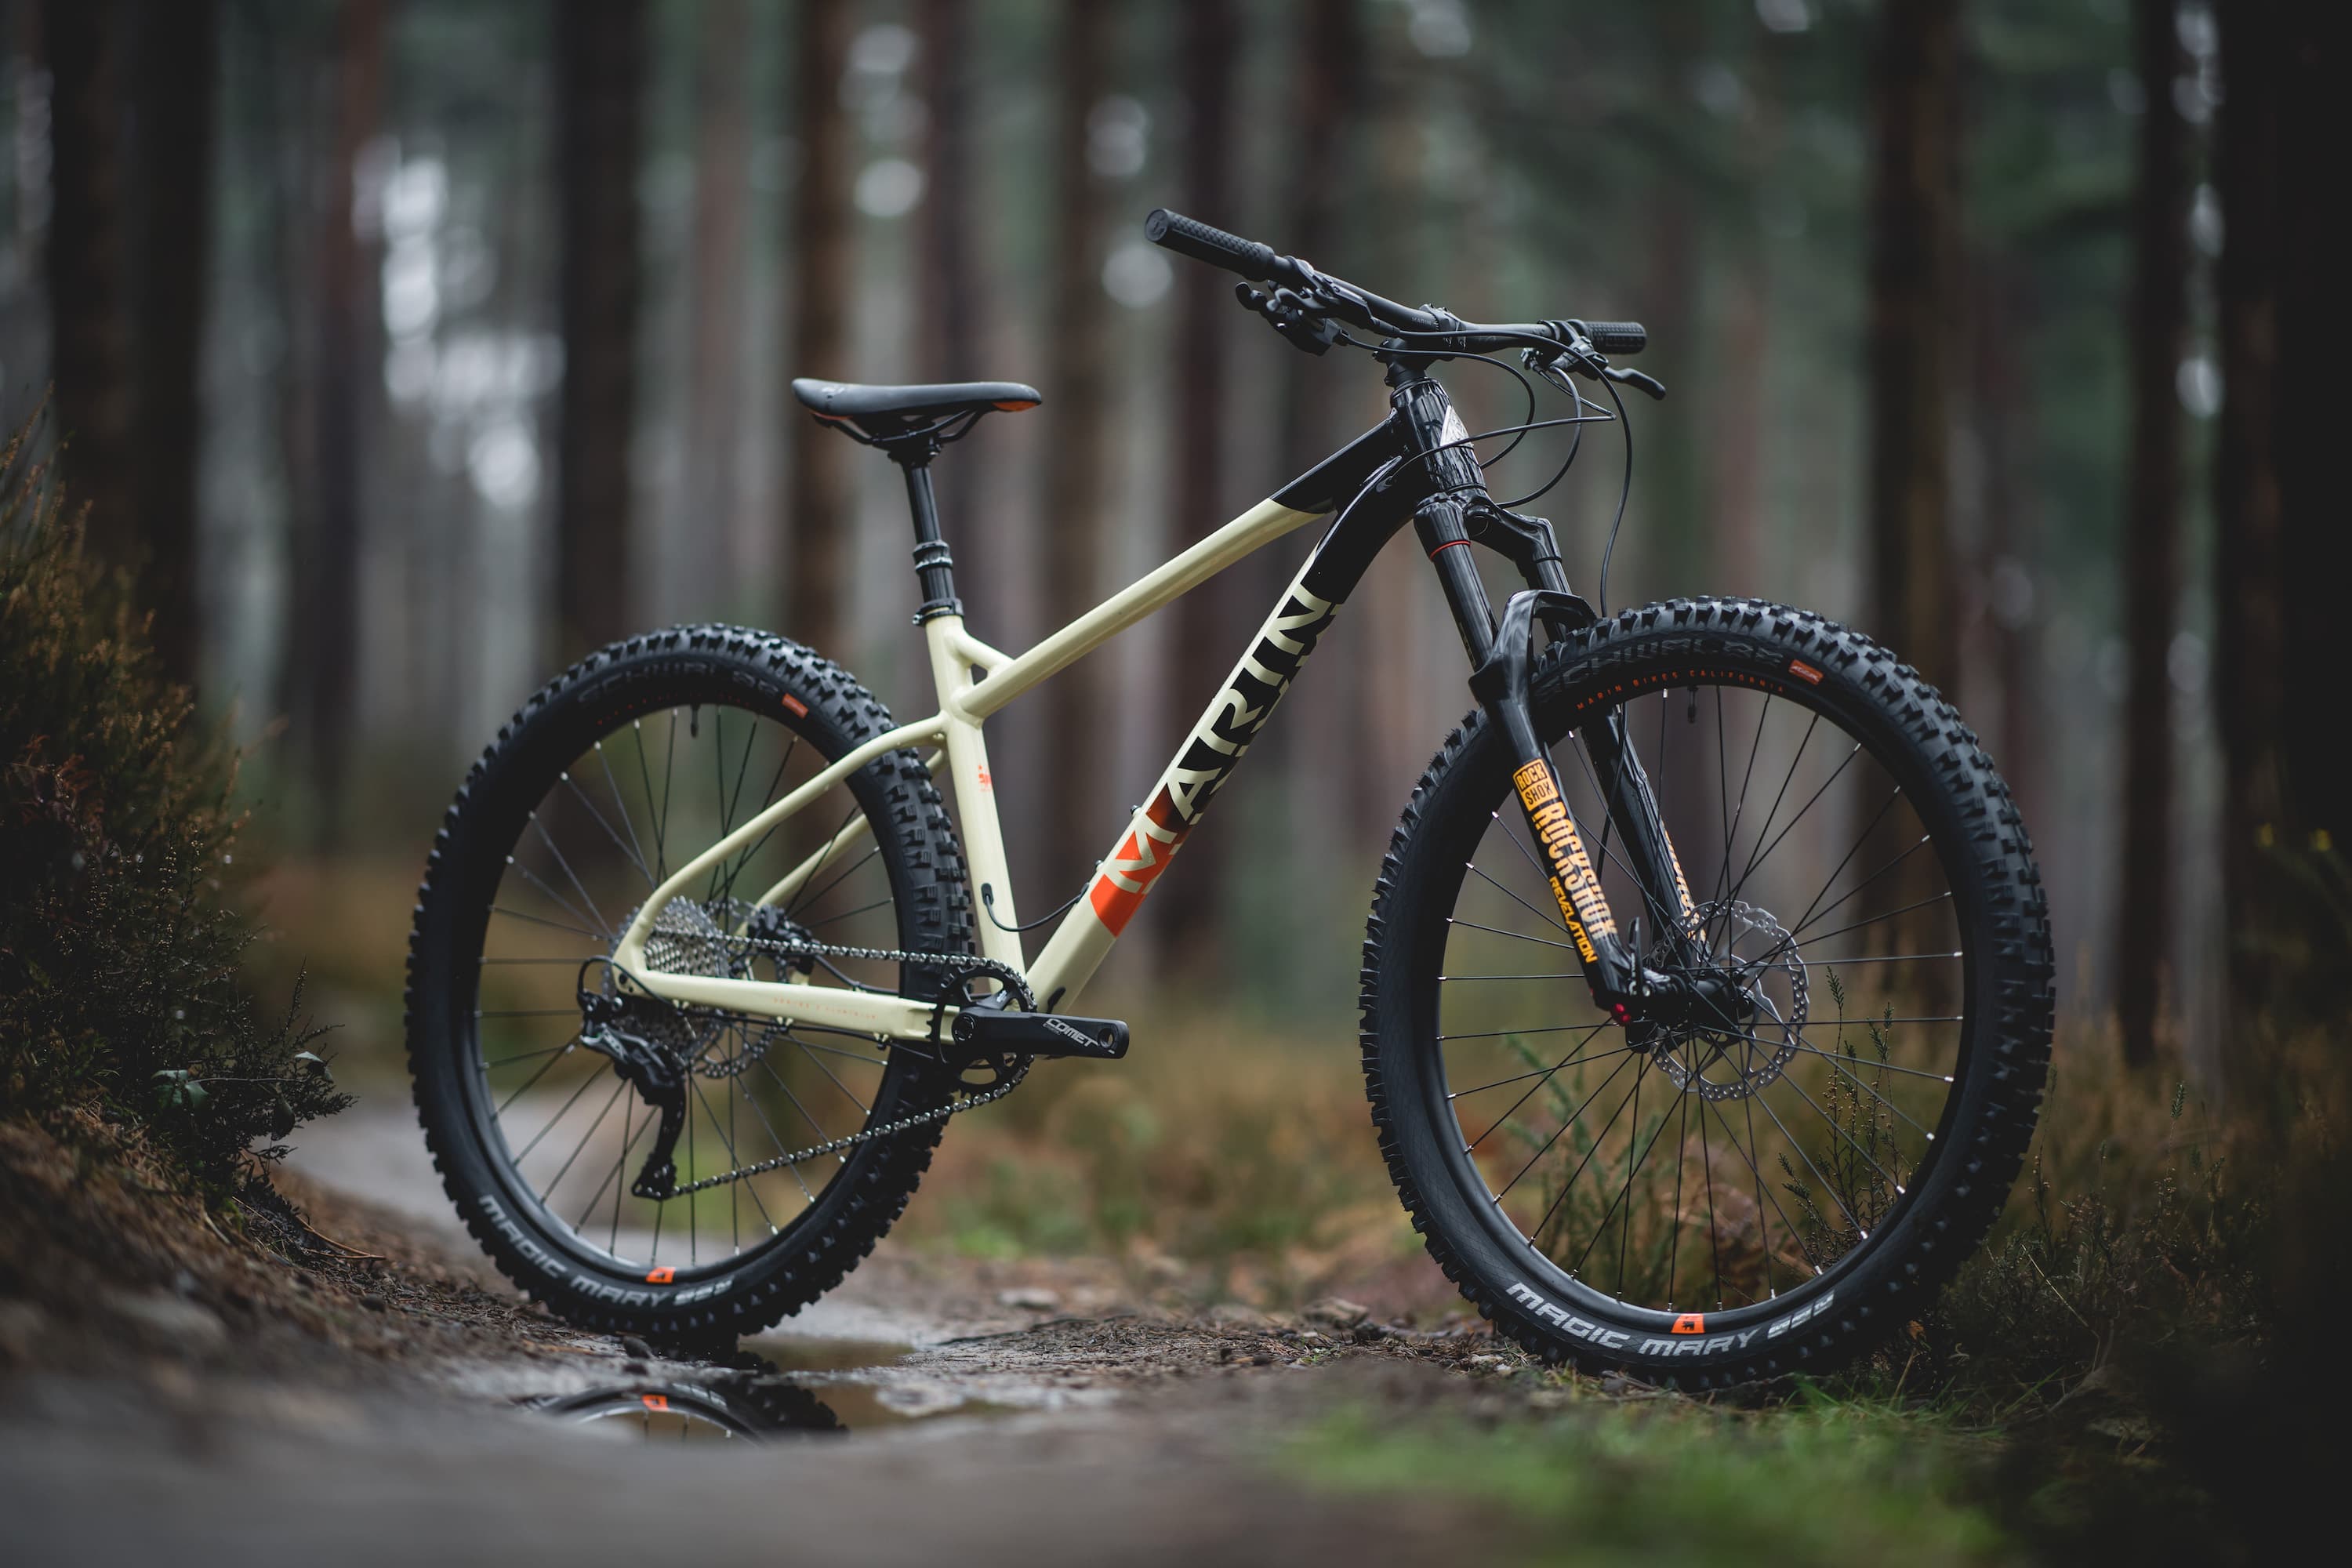 New From Marin an “Aggressive Hardtail” – The San Quentin